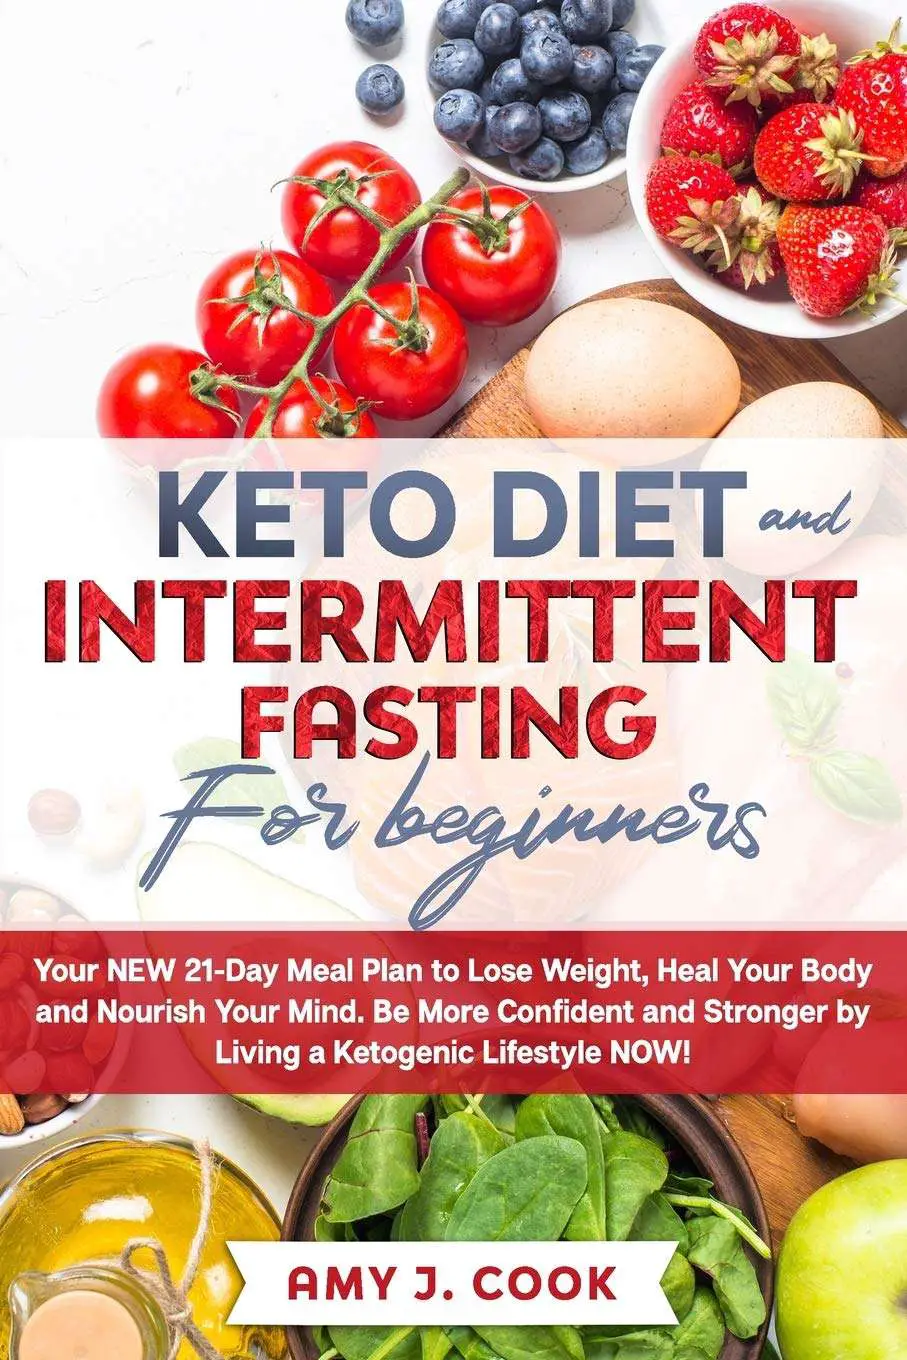 KETO DIET AND INTERMITTENT FASTING FOR BEGINNERS: Your NEW 21